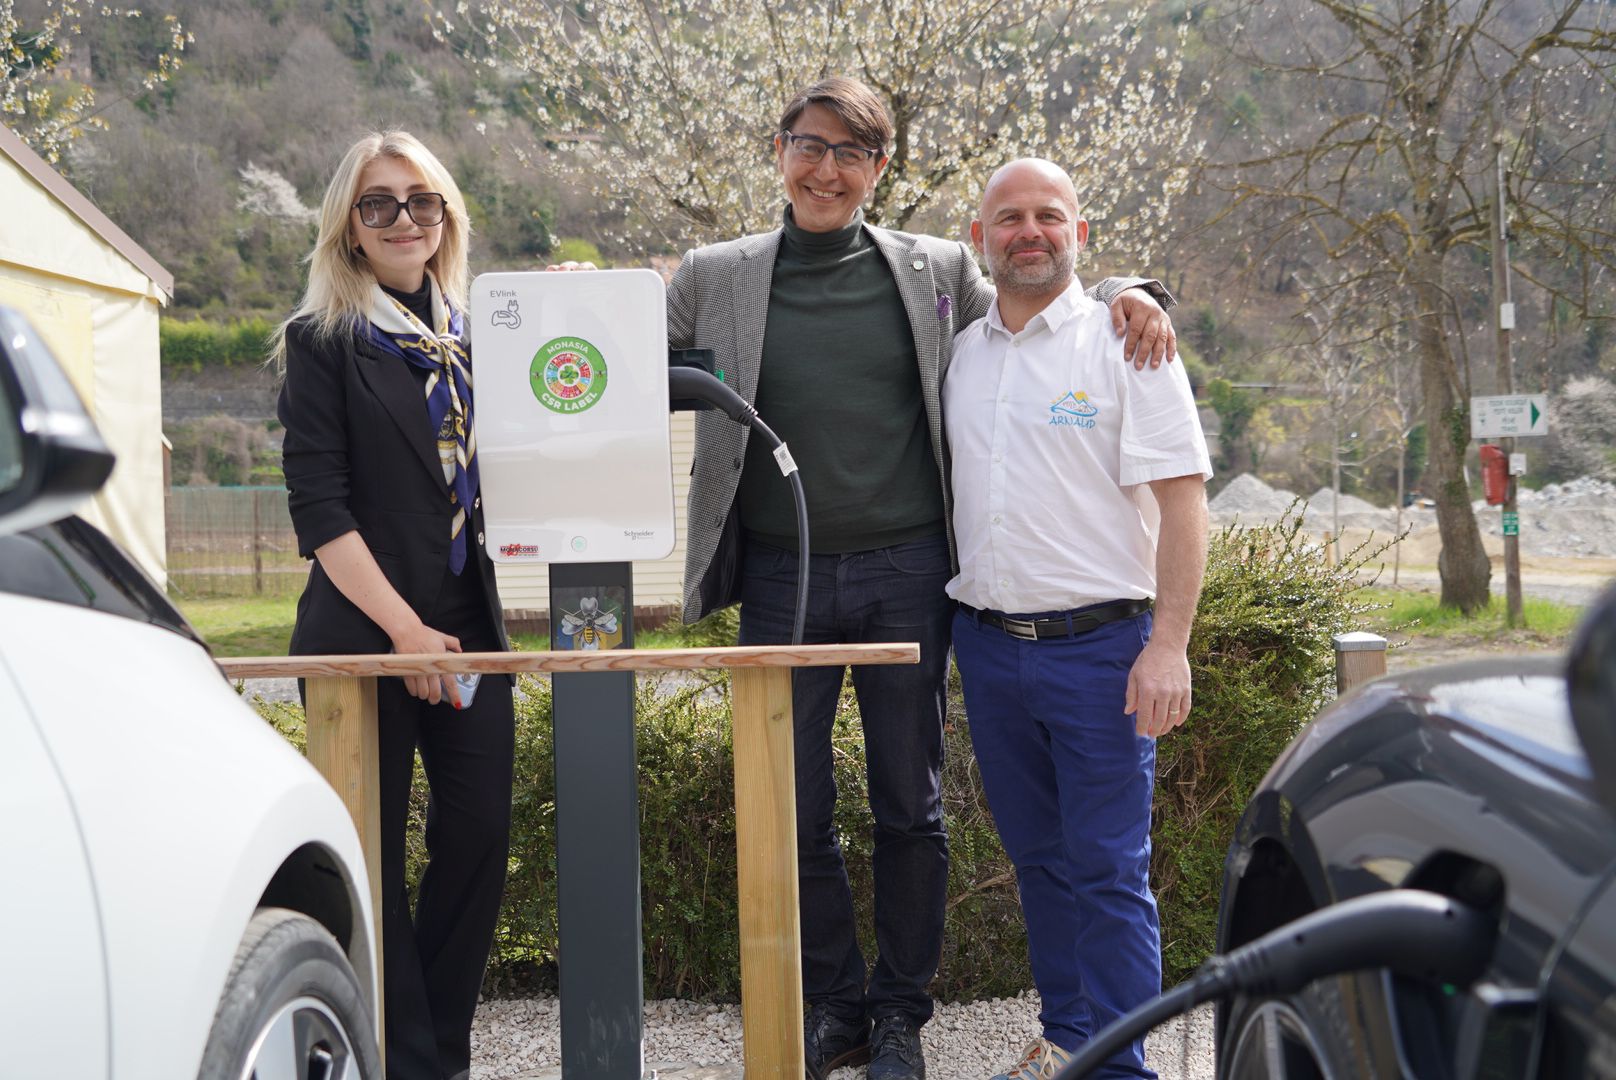 Power to the plug-ins celebrated at the Camping Les Templiers made possible by Lepton Charity Foundation with a media support of MonAsia Association photo